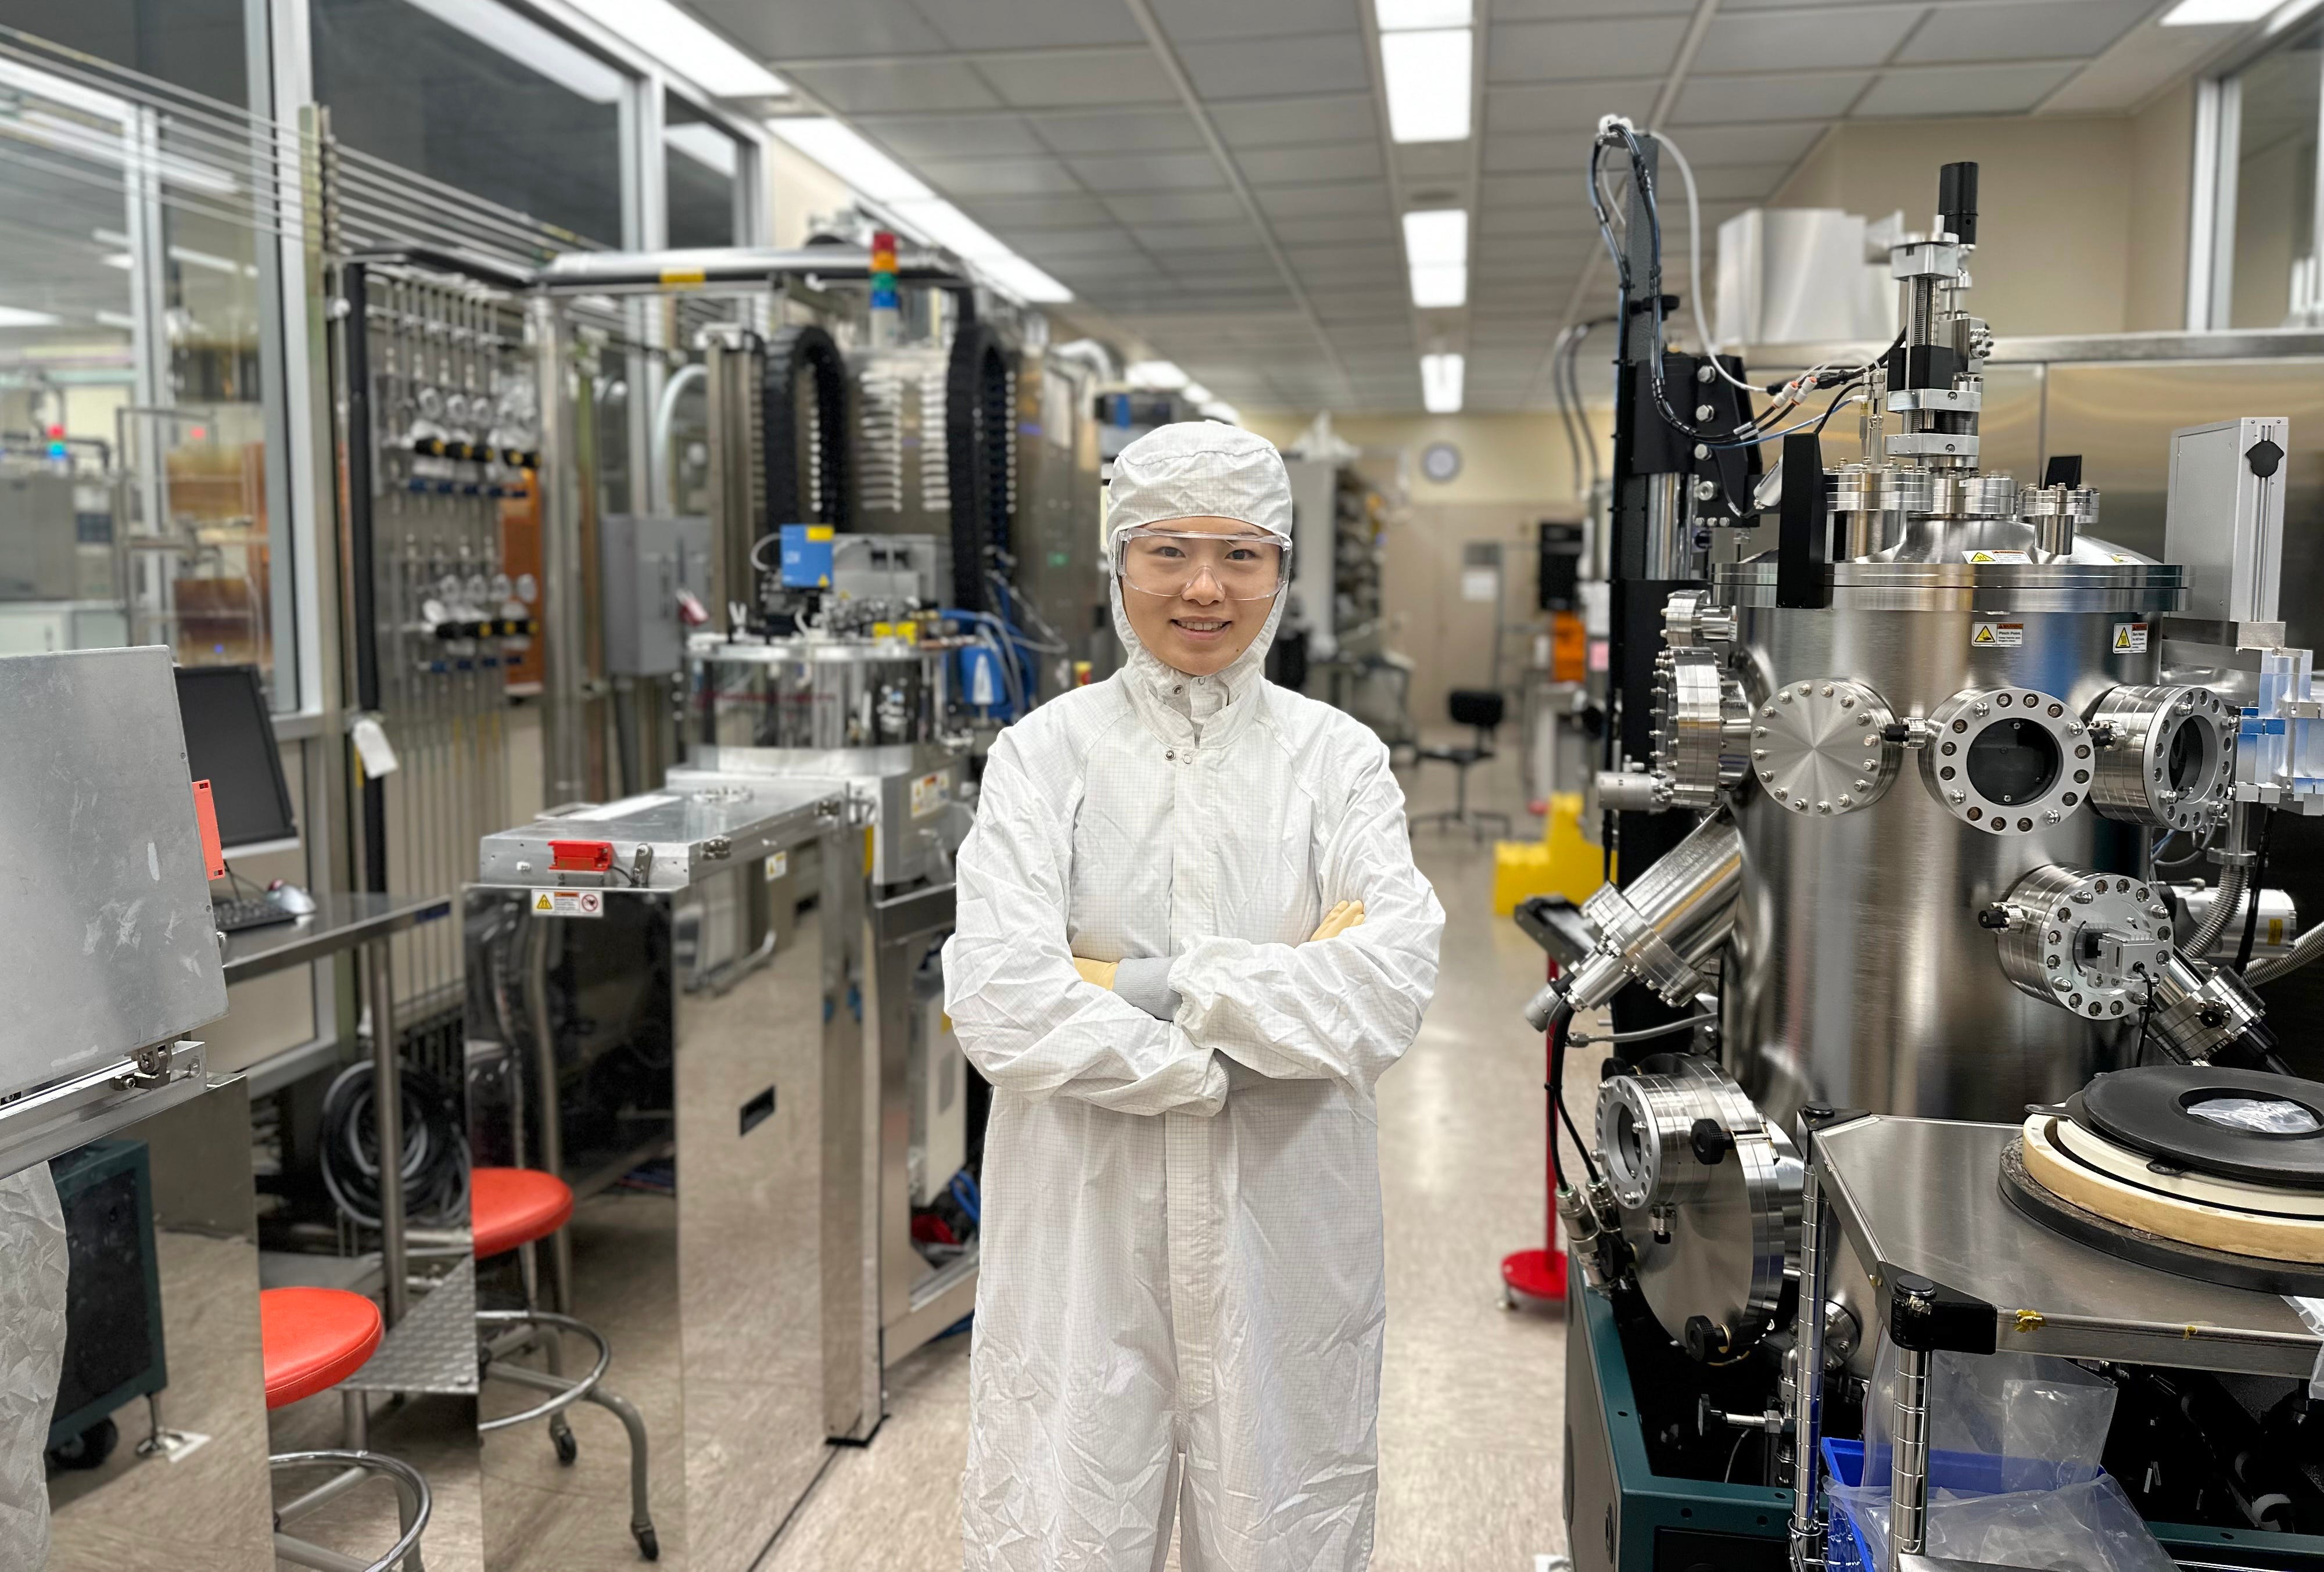 Lin Du is a researcher with the NeuroTech Institute, a partnership between Ohio State University and Battelle.